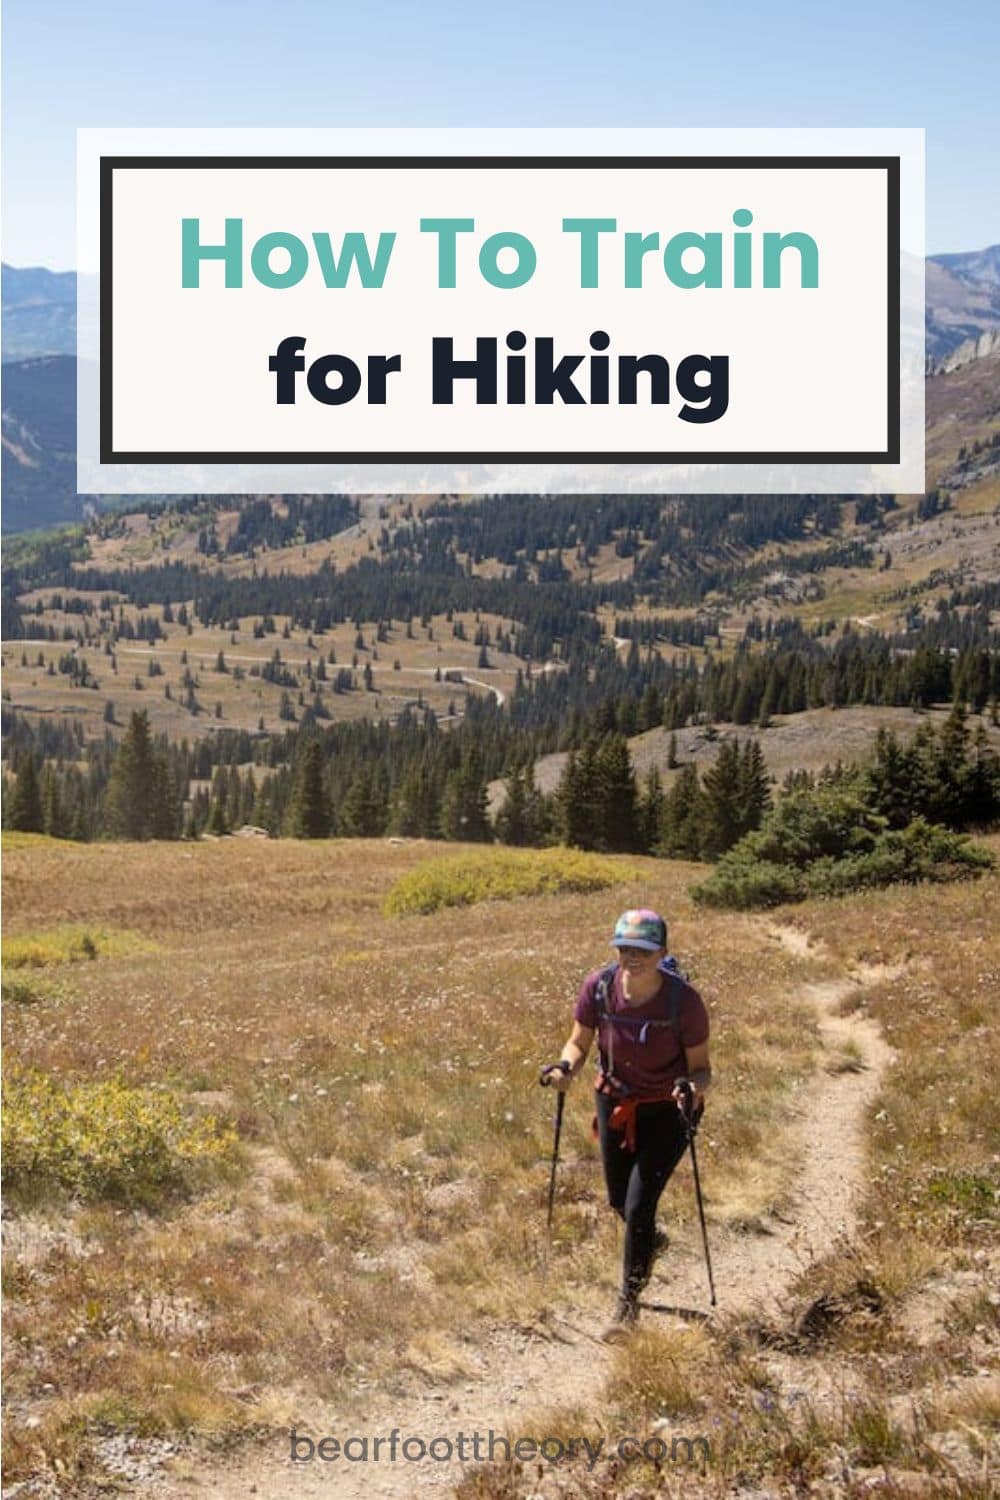 Learn how to train for hiking with easy tips and tricks so you can get in shape and be prepared for your next hiking adventure.